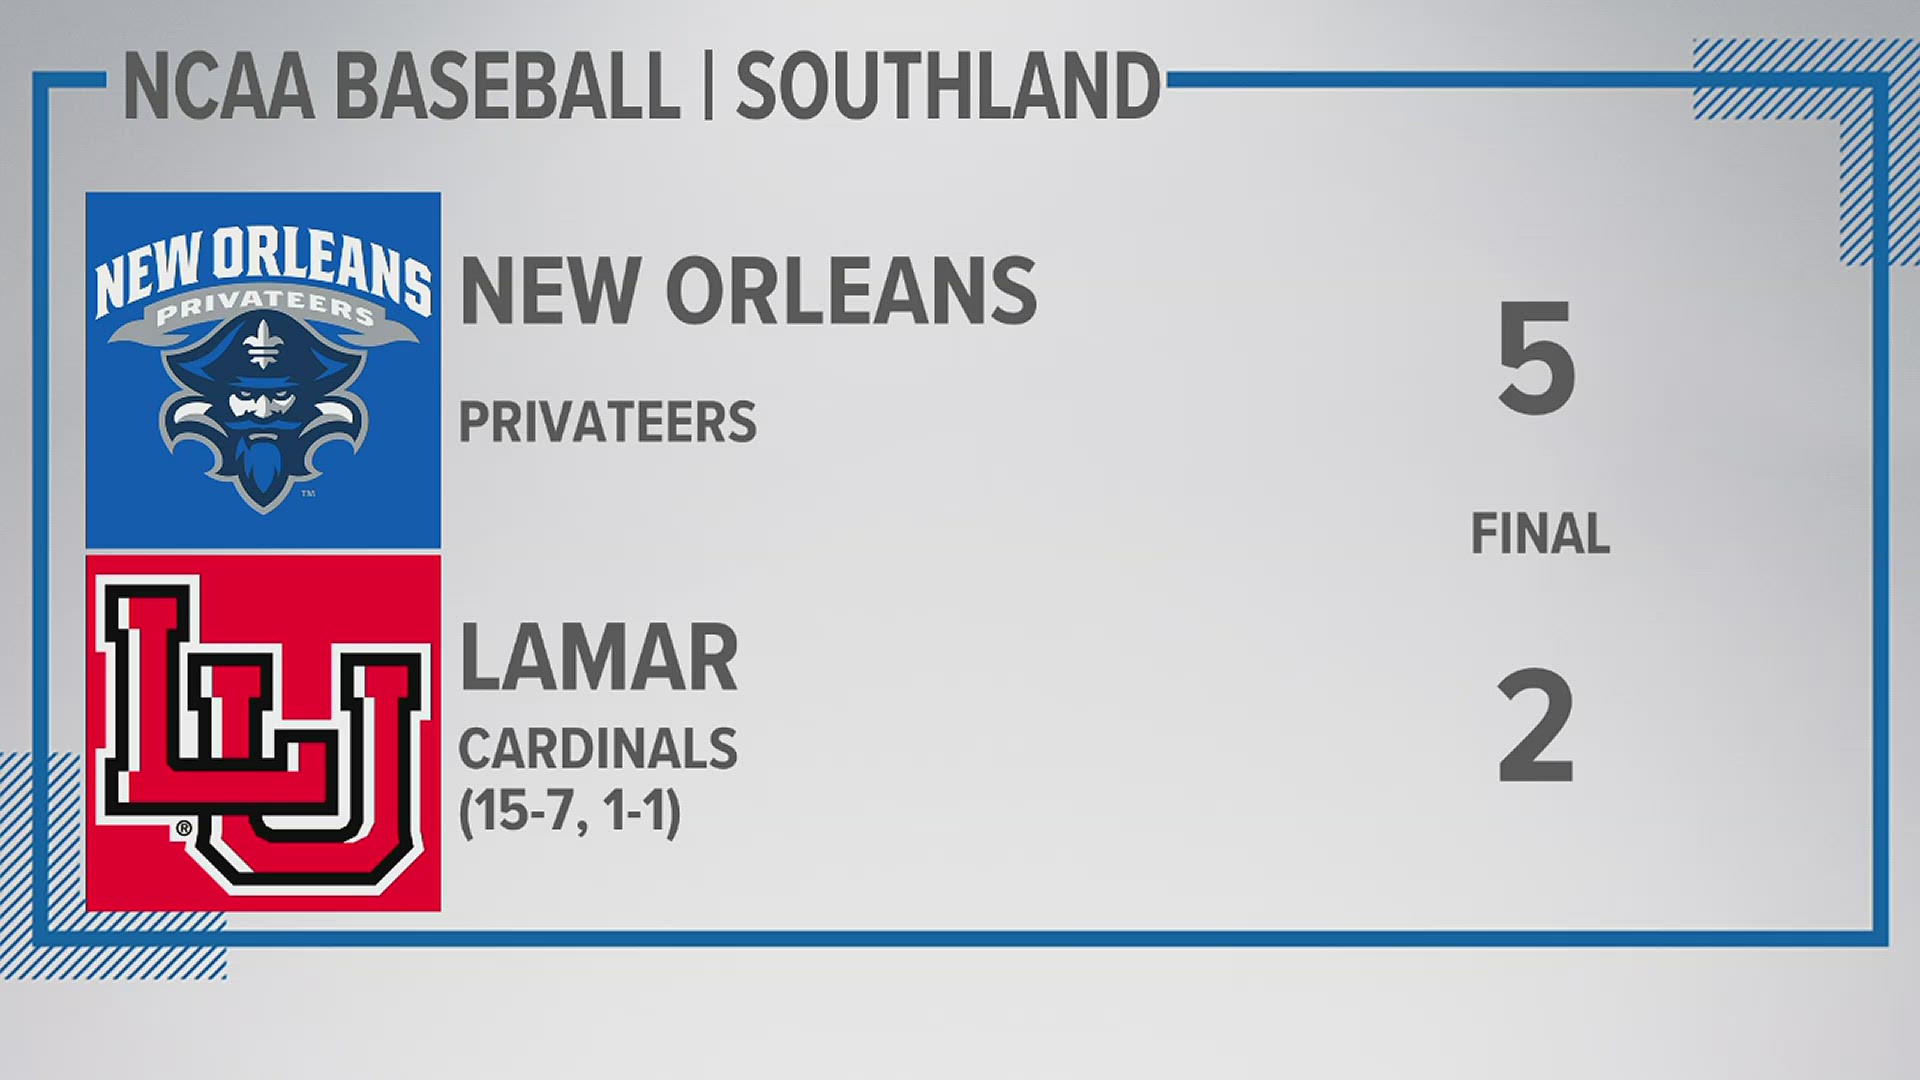 The loss drops Lamar to 15-7 on the season and 1-1 in Southland Conference play.